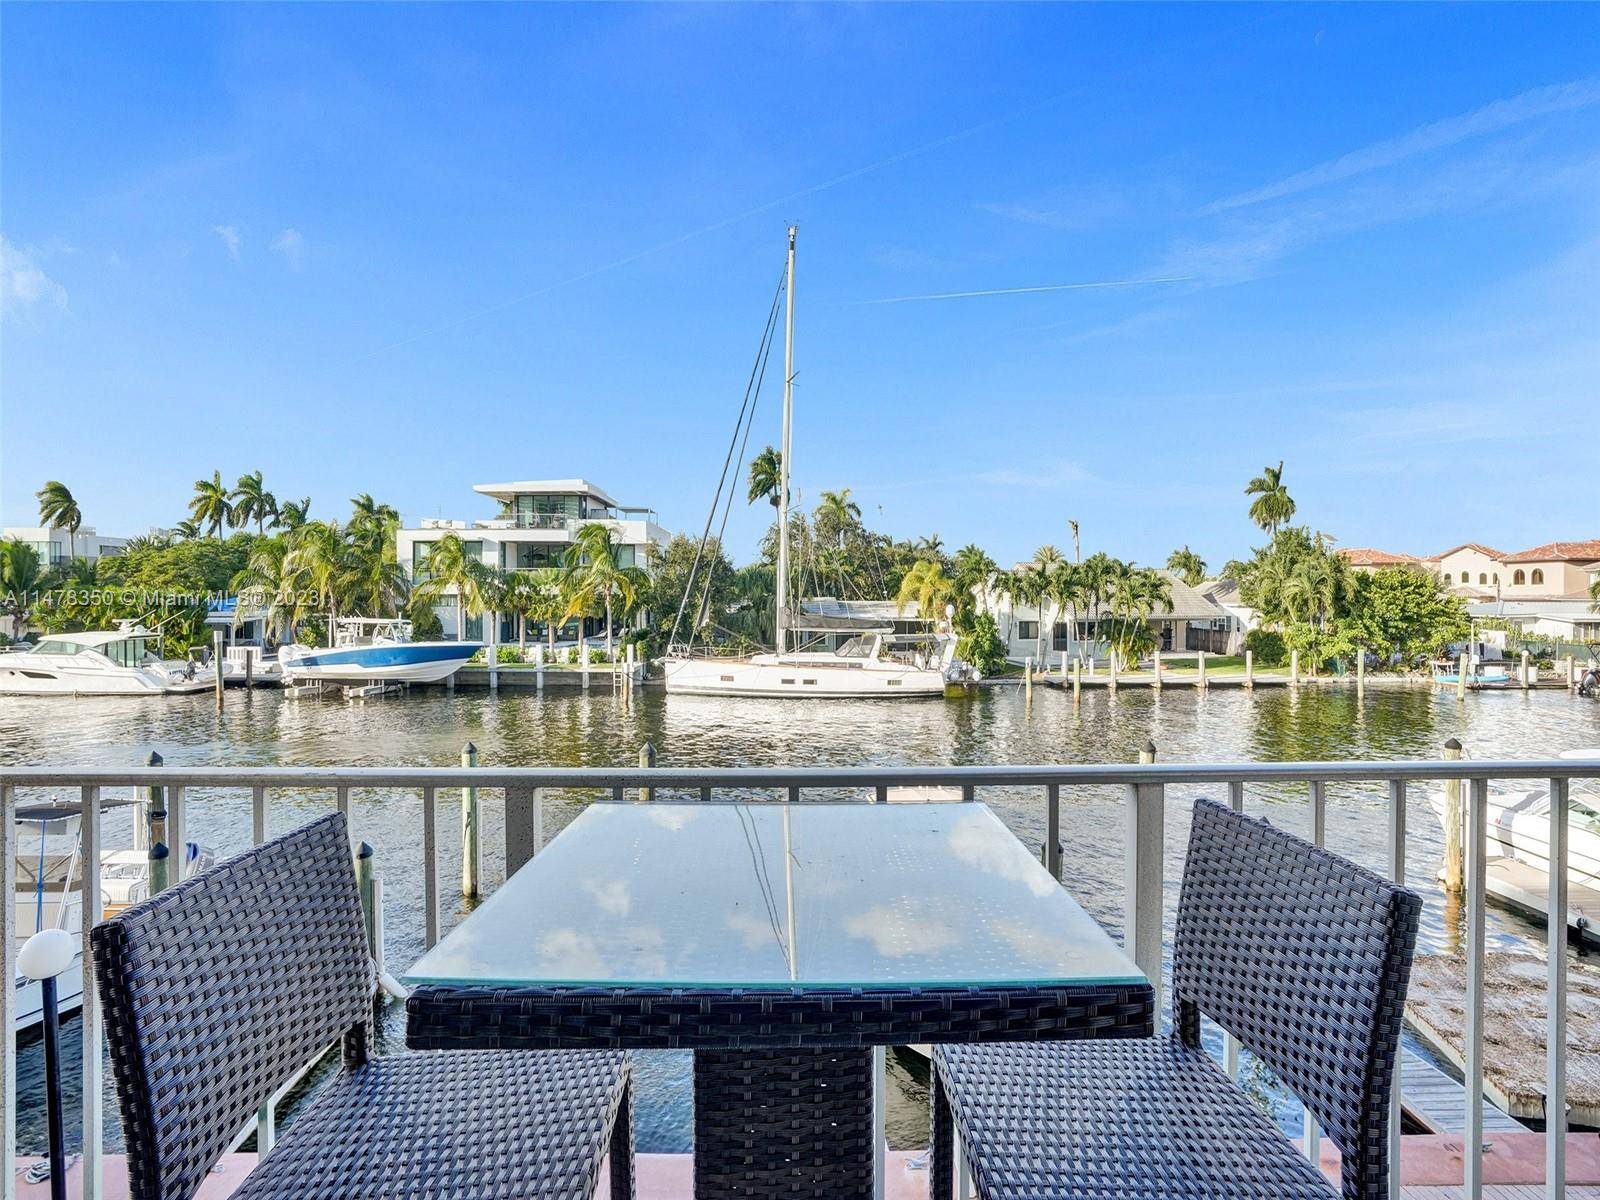 Experience waterfront luxury in Fort Lauderdale with this 2 bedroom, 1.